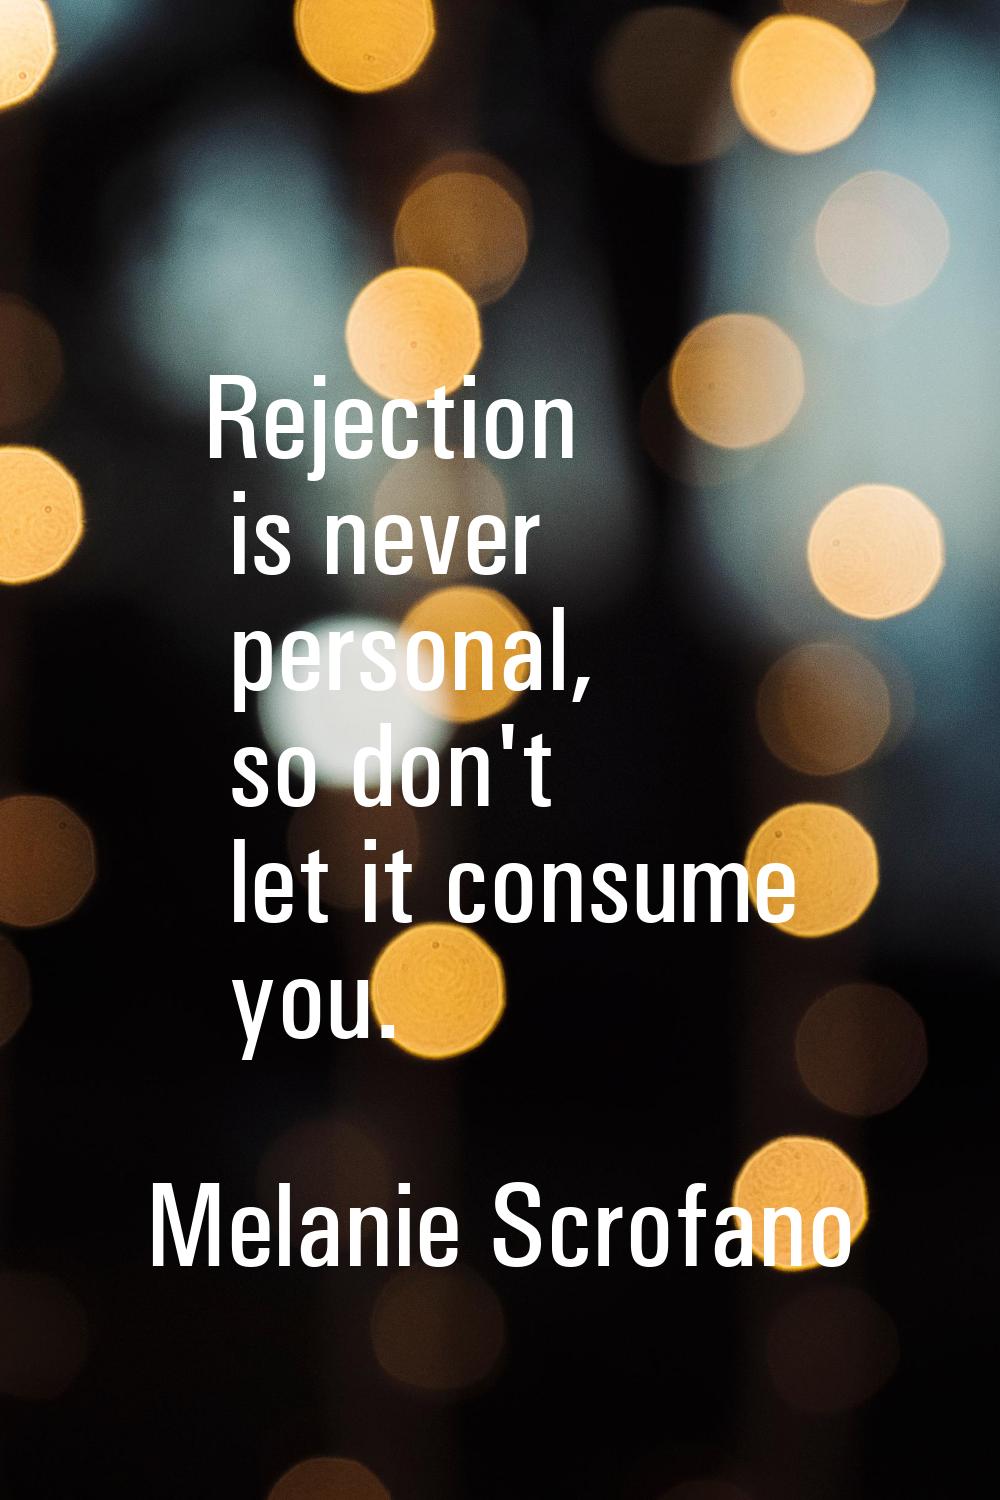 Rejection is never personal, so don't let it consume you.